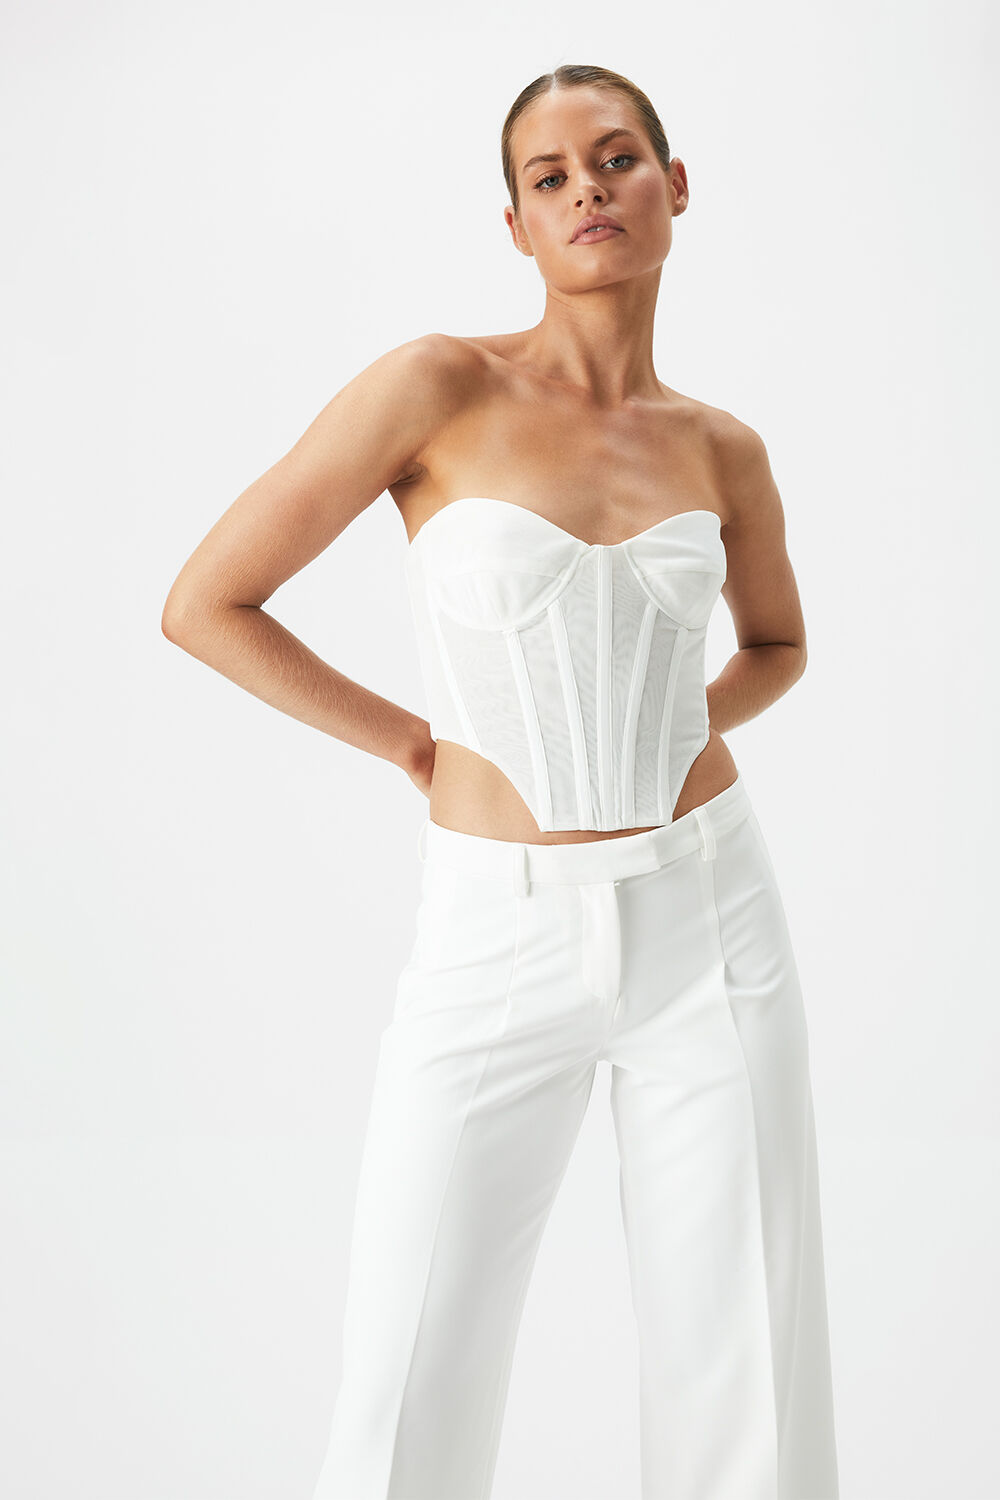 LITHIUM MESH BUSTIER in colour BRIGHT WHITE